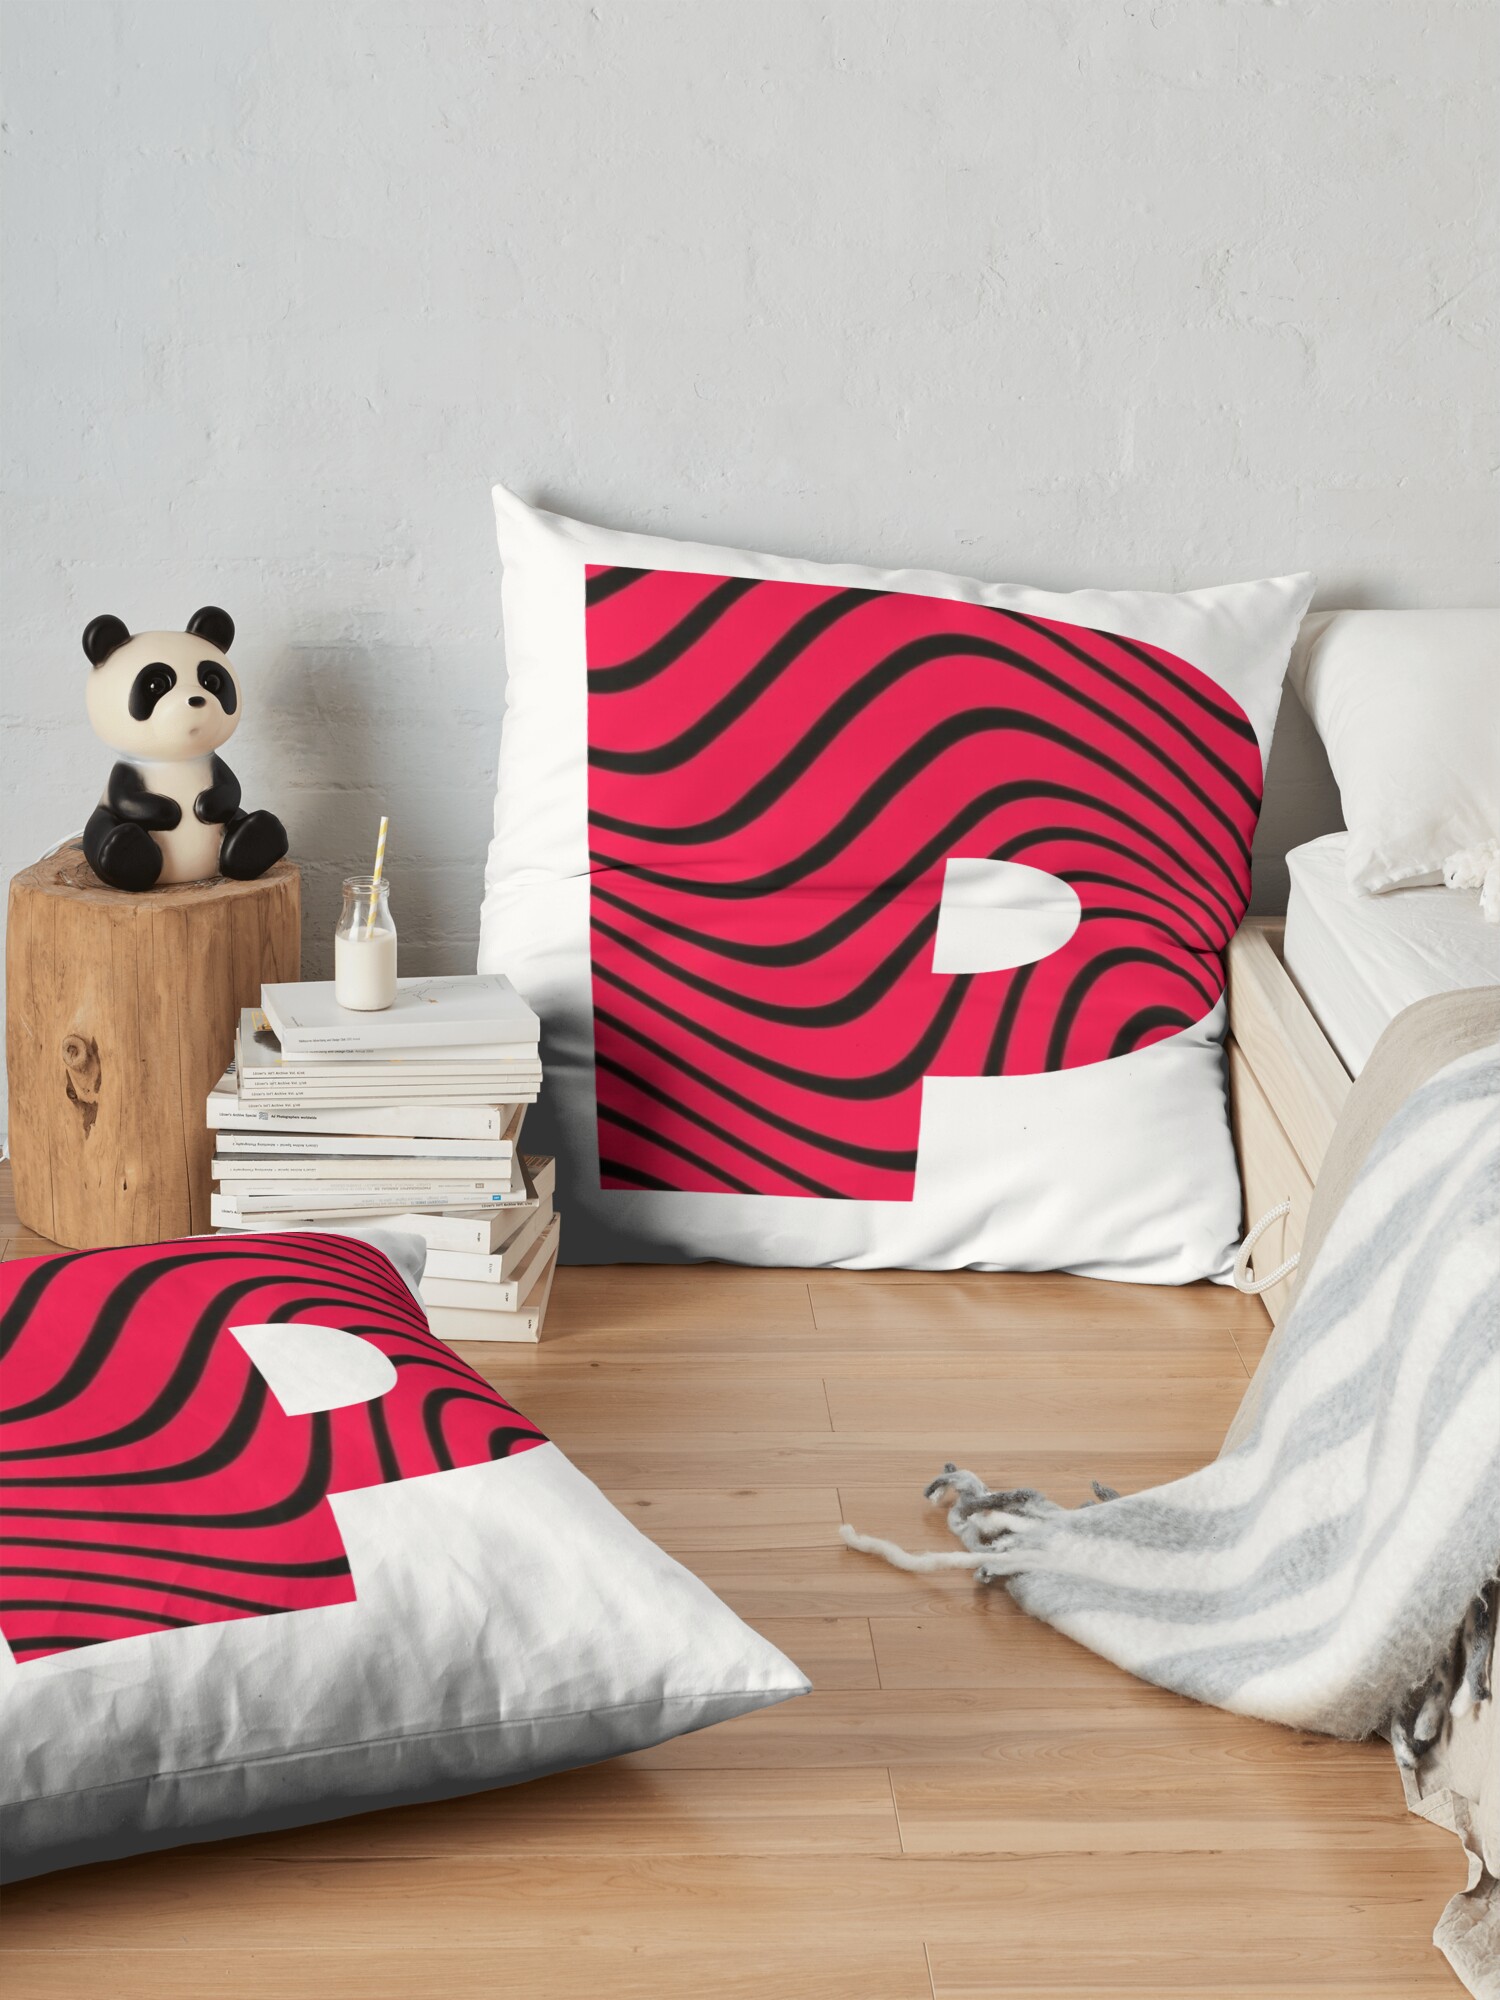 throwpillowsecondary 36x362000x2000 bgf8f8f8 11 - Pewdiepie Store